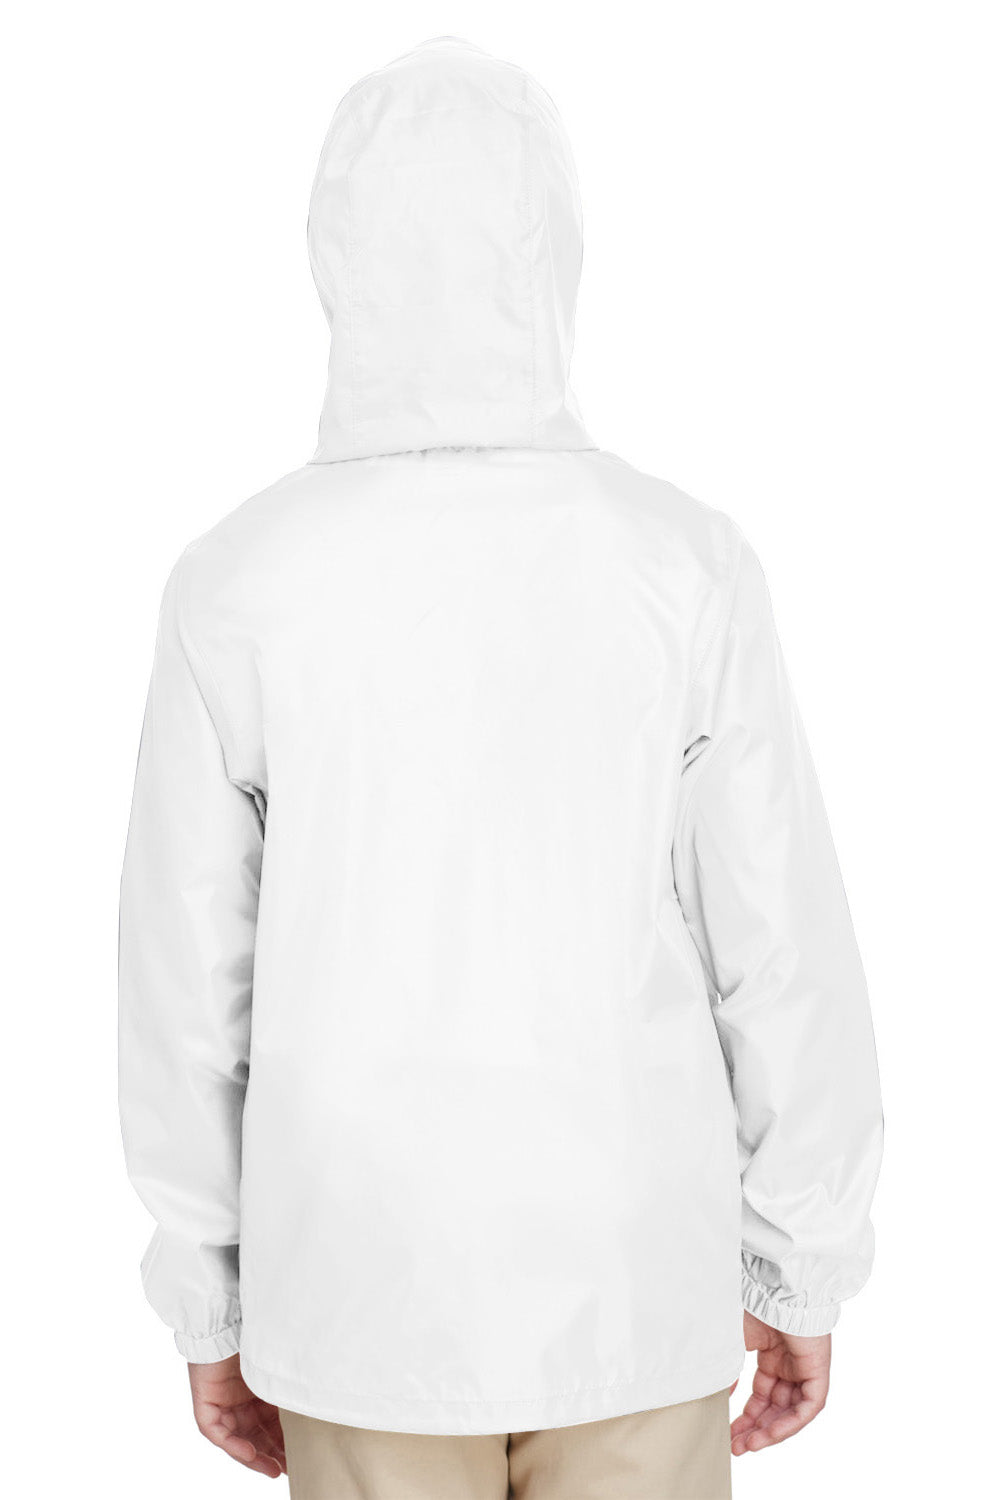 Team 365 TT73Y Youth Zone Protect Water Resistant Full Zip Hooded Jacket White Back